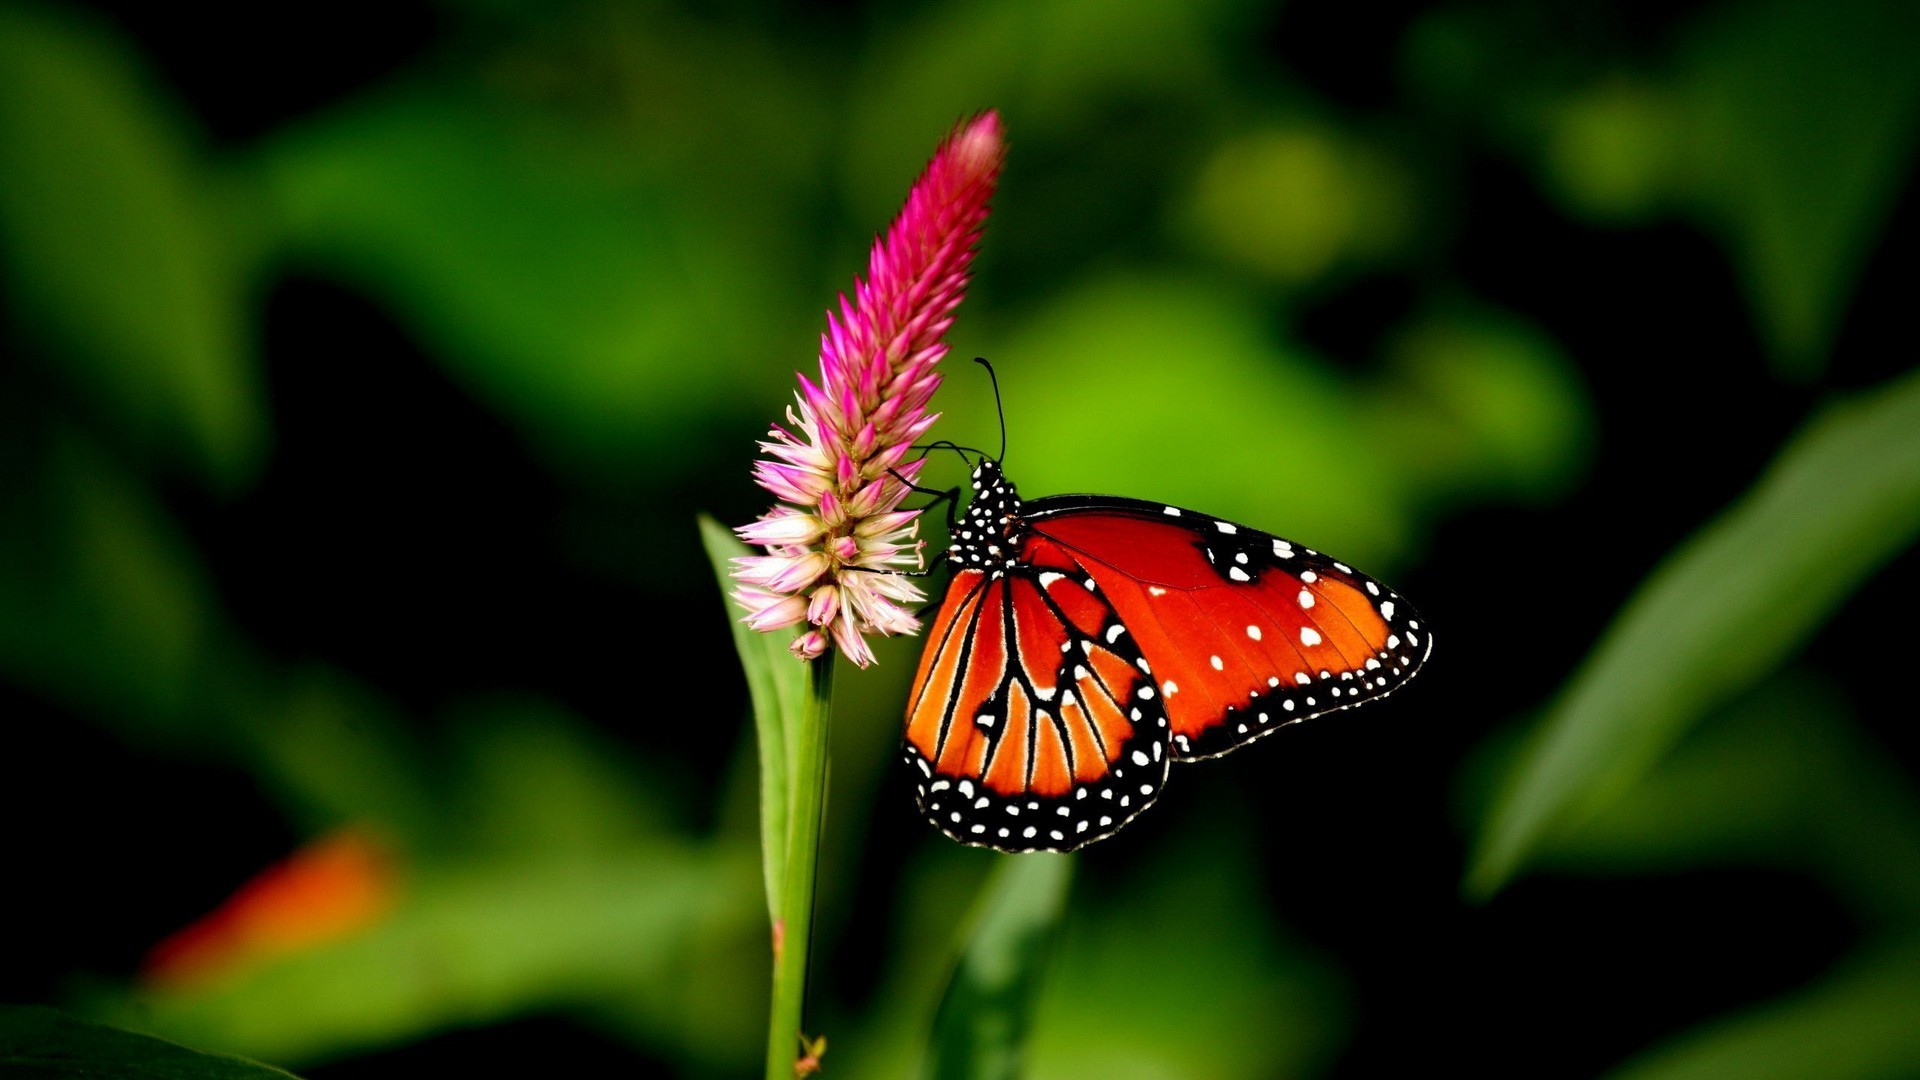 HD Wallpaper Cute Butterfly With Resolution 1920X1080